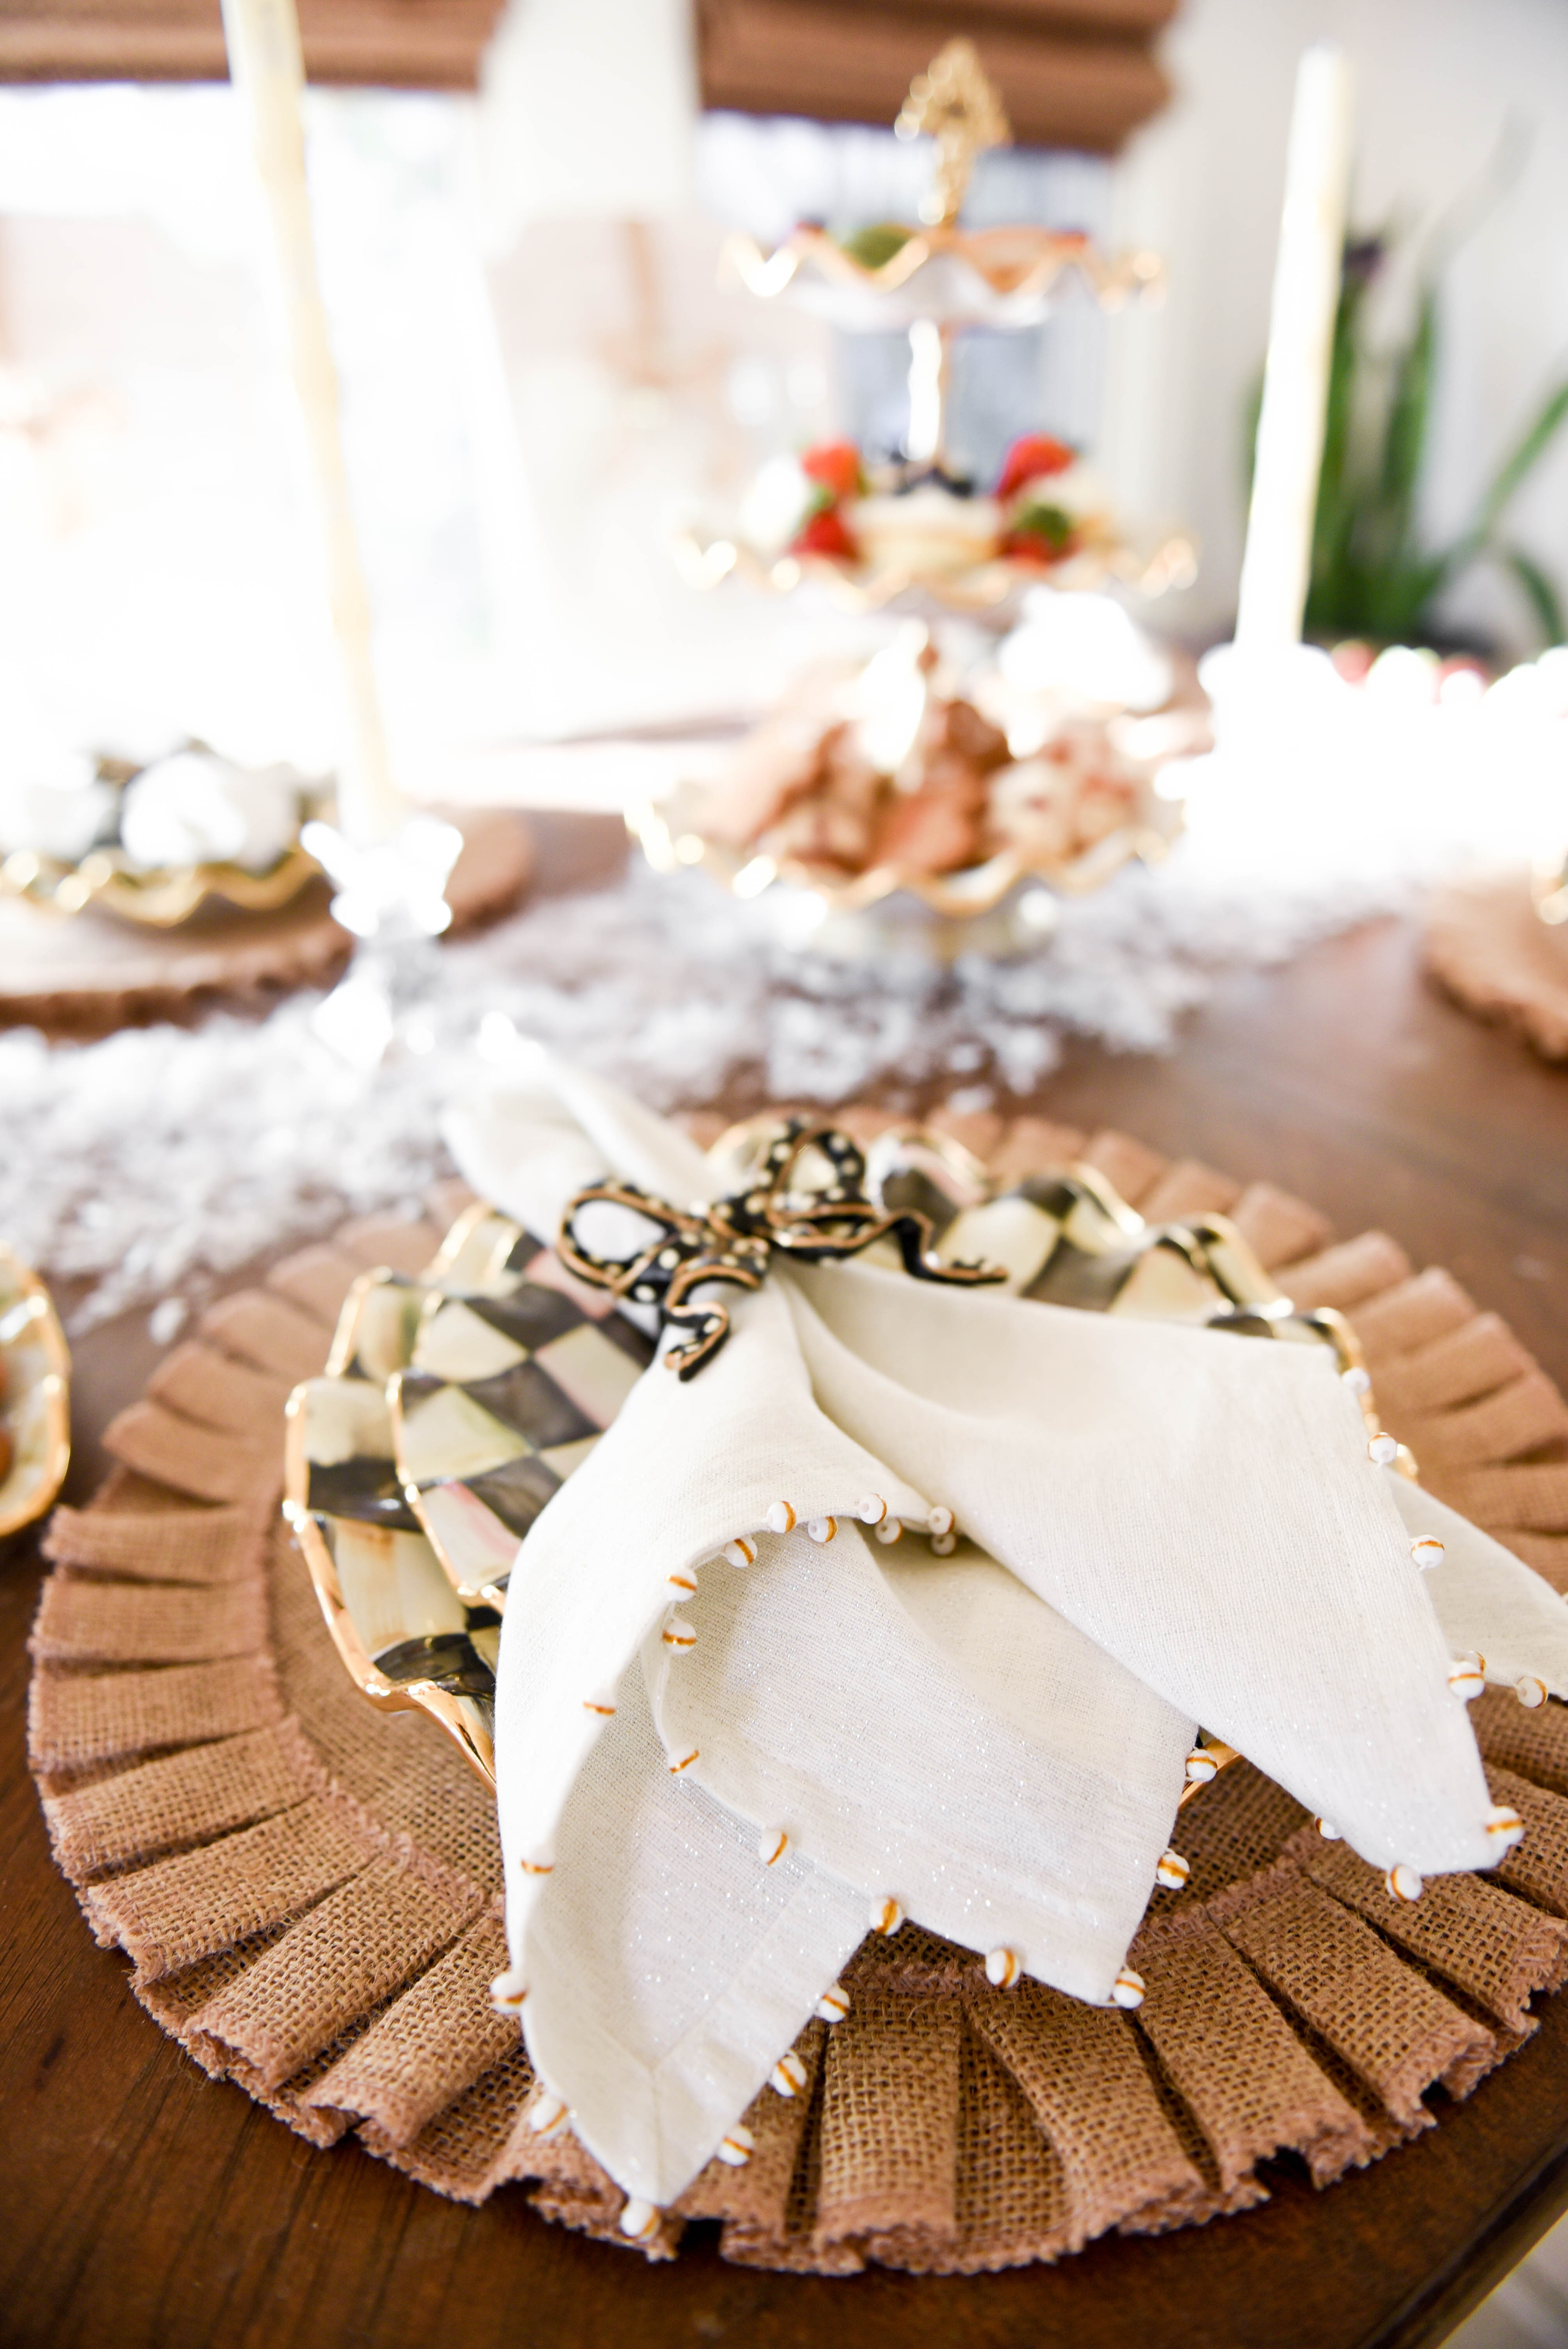 Lo-Murphy-Mackenzie-Childs-Holiday-Tablescape-Home-Decor-dessert-tray-courtley-check-three-tiered-stand